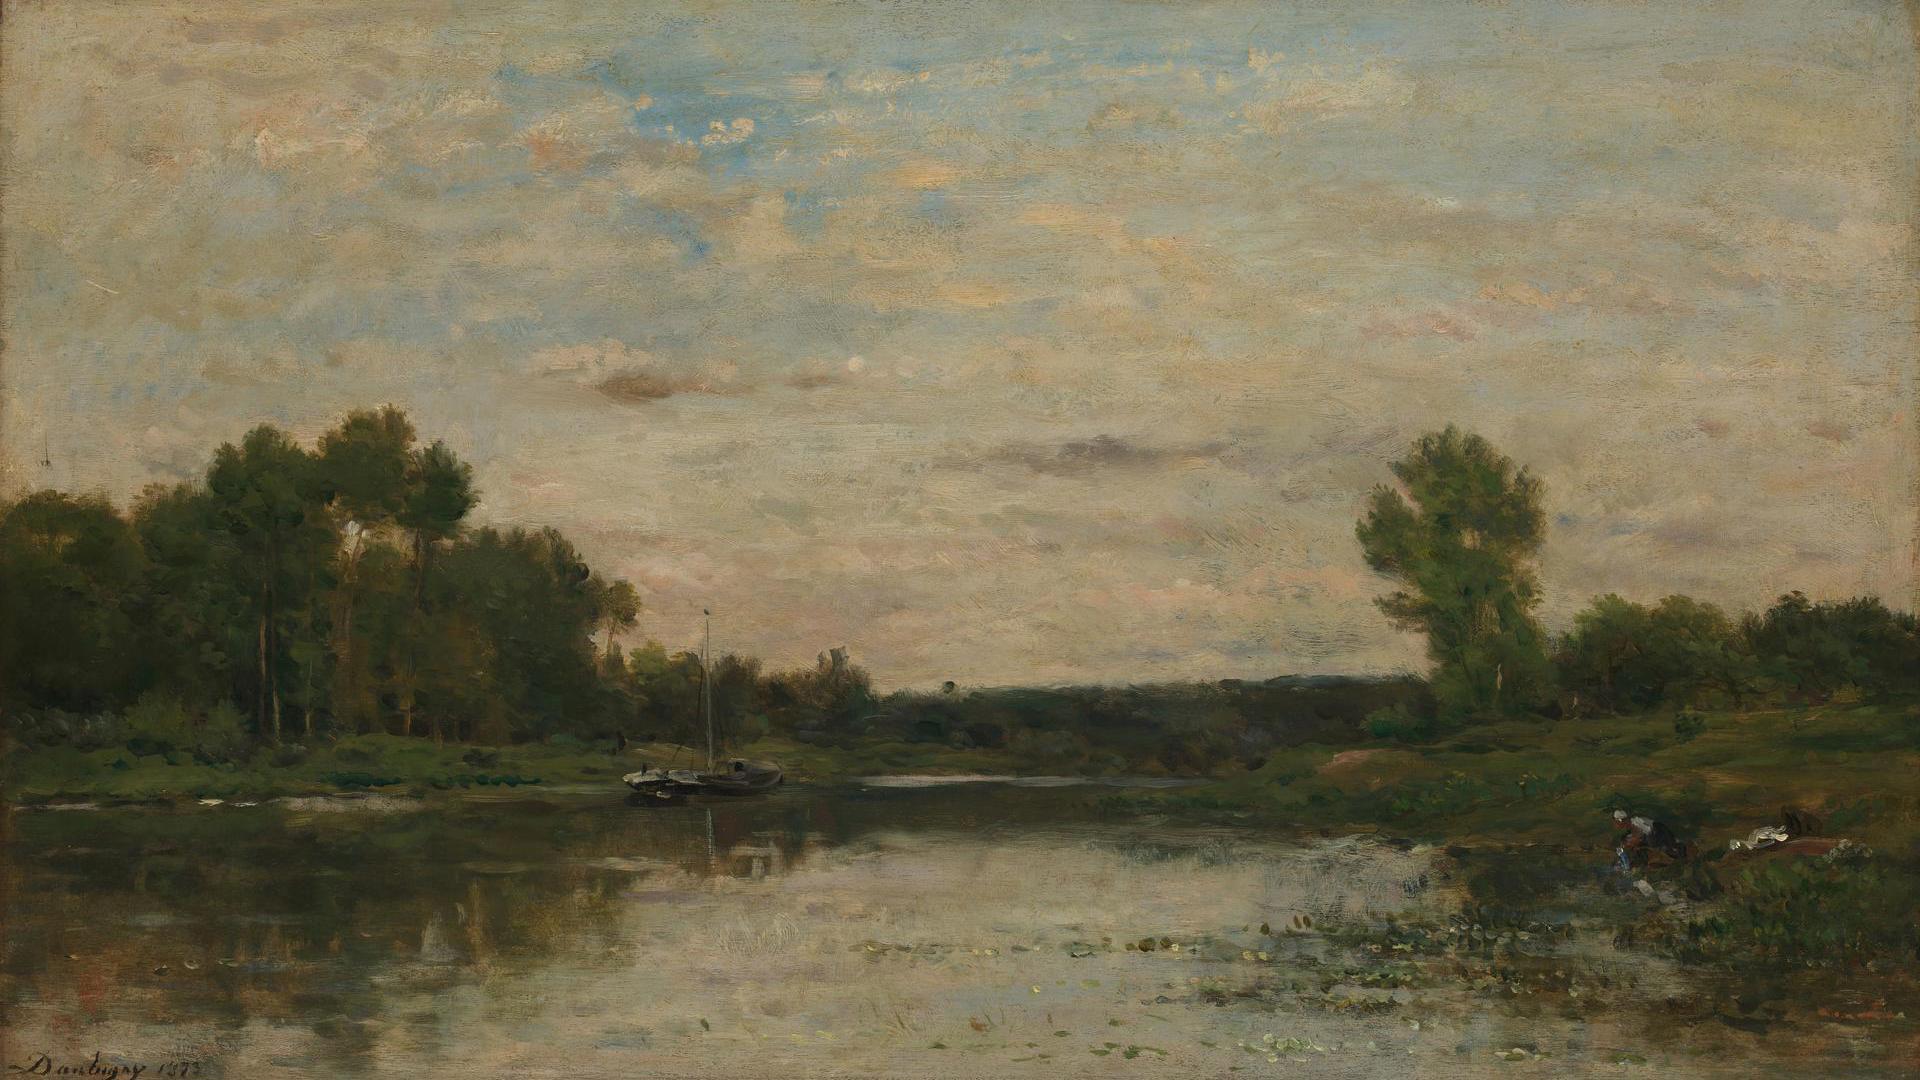 View on the Oise by Charles-François Daubigny